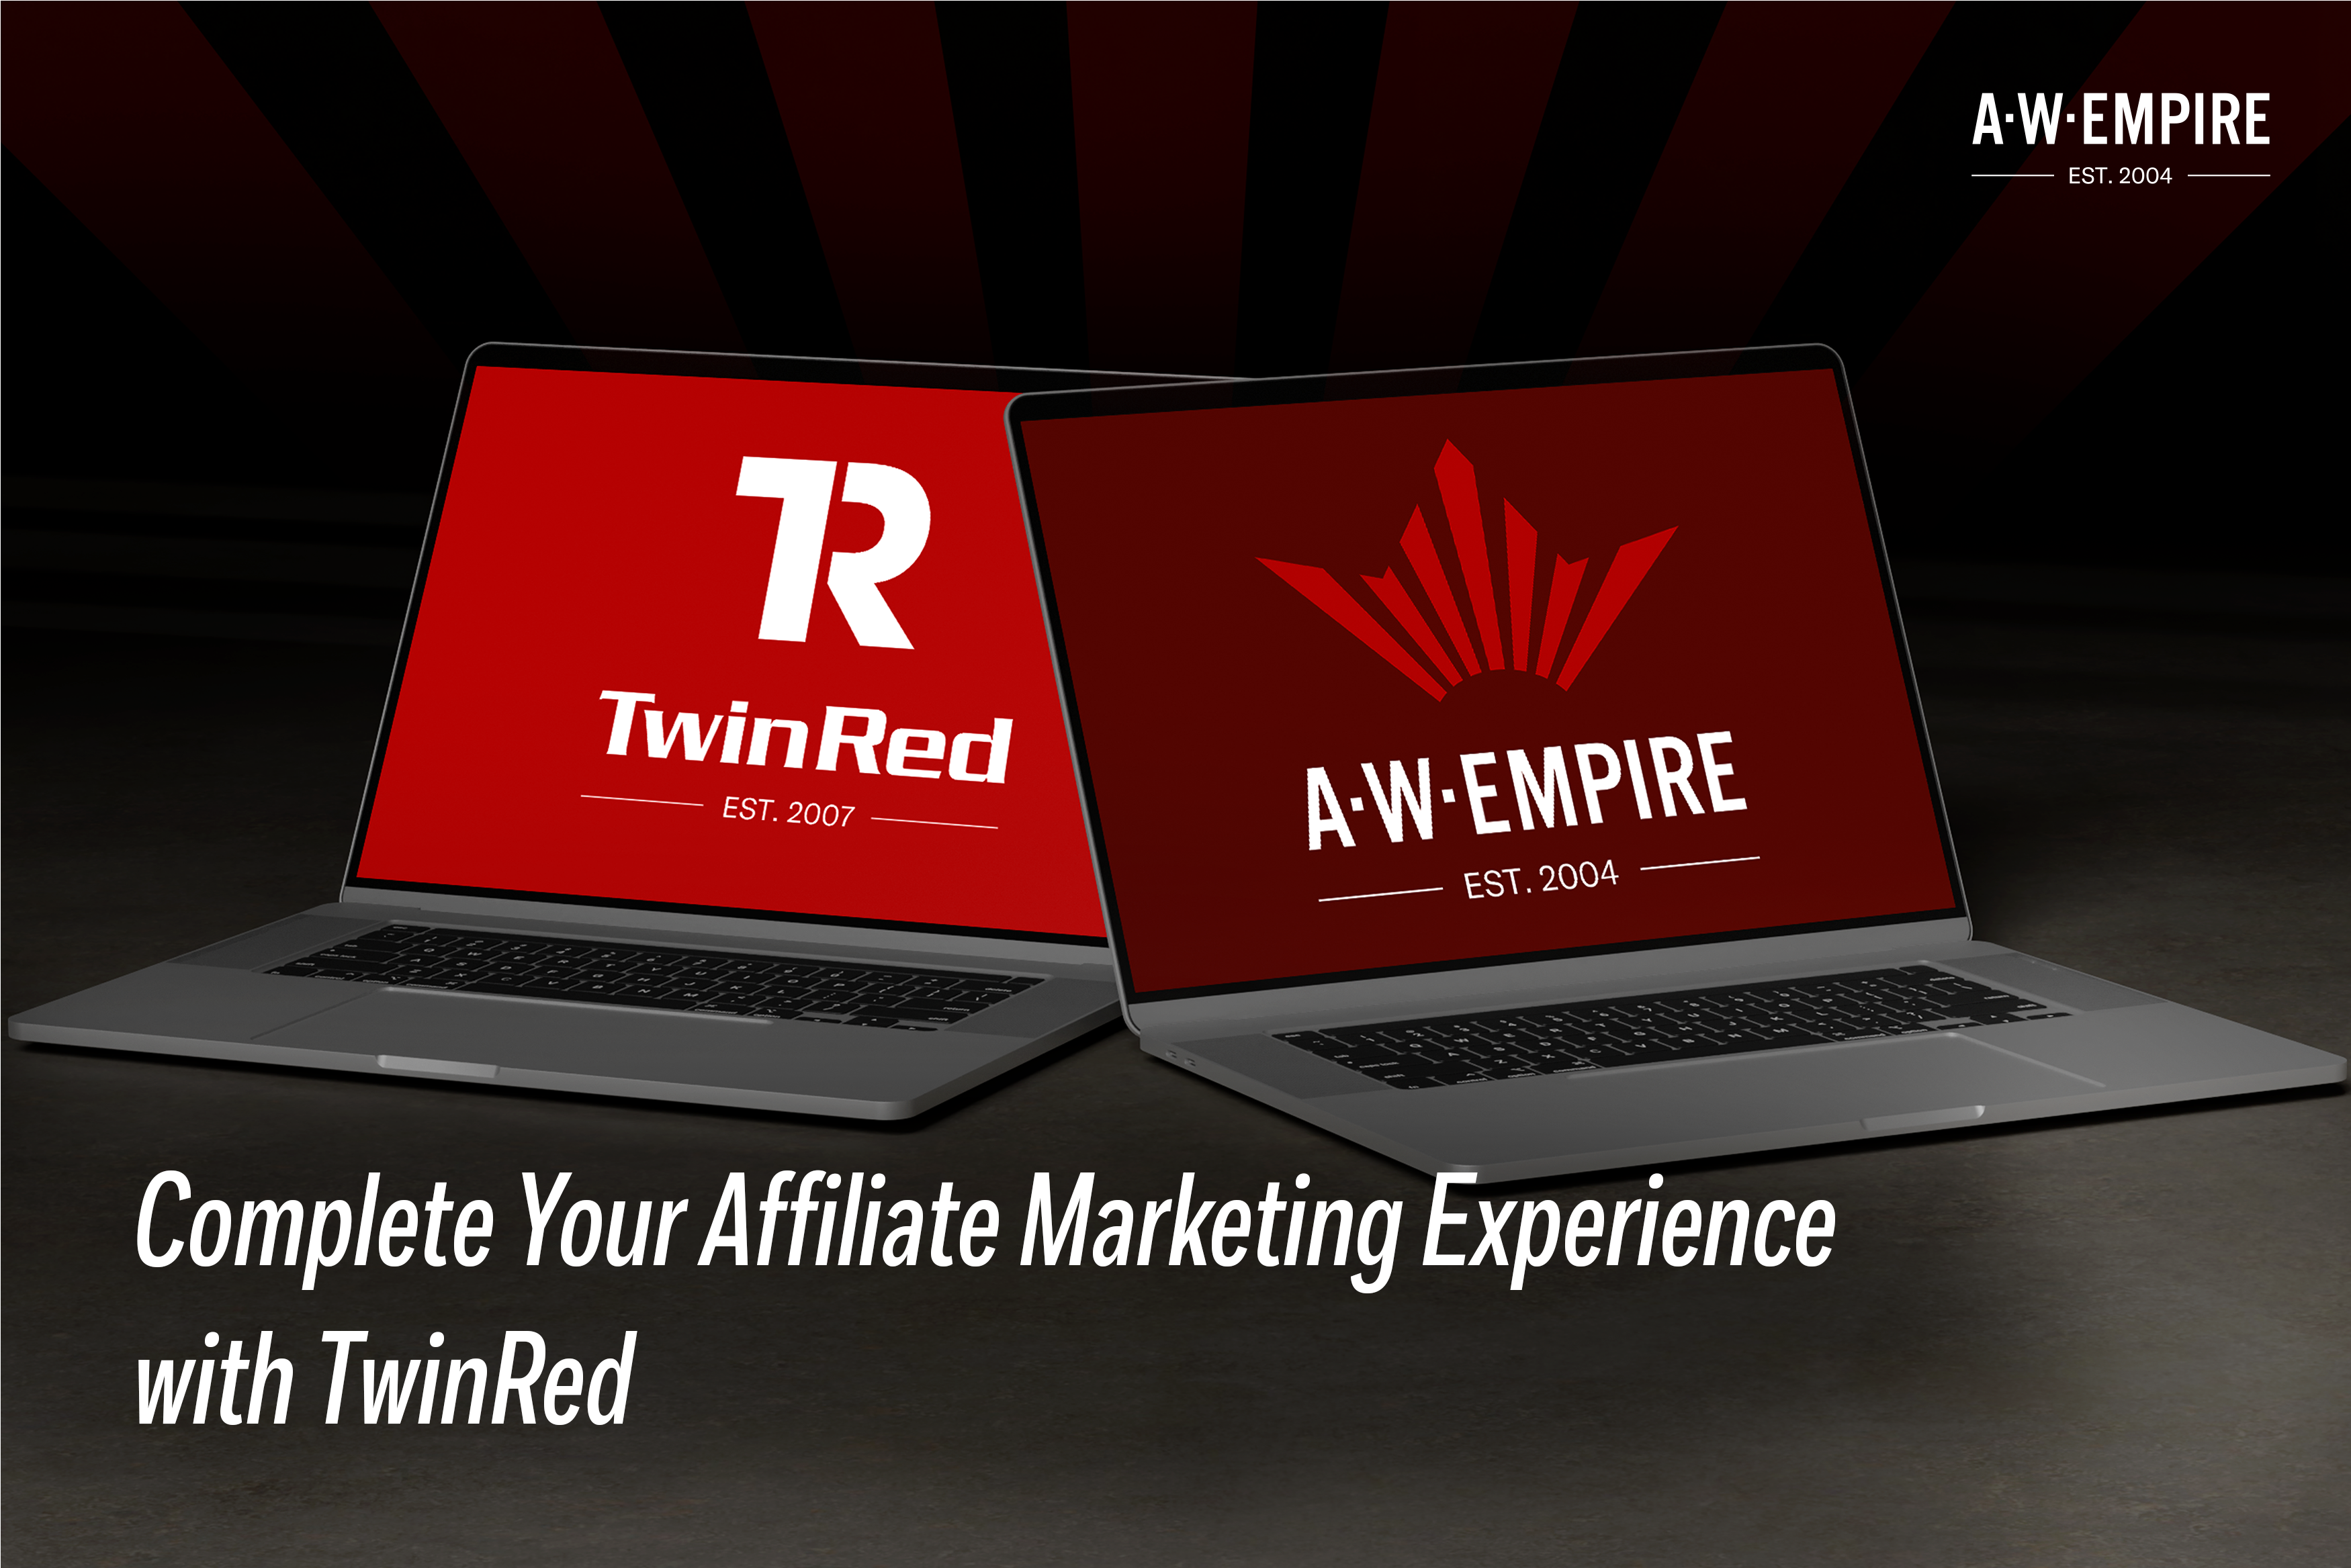 Working with A.W. Empire and TwinRed improves your campaign efficiency